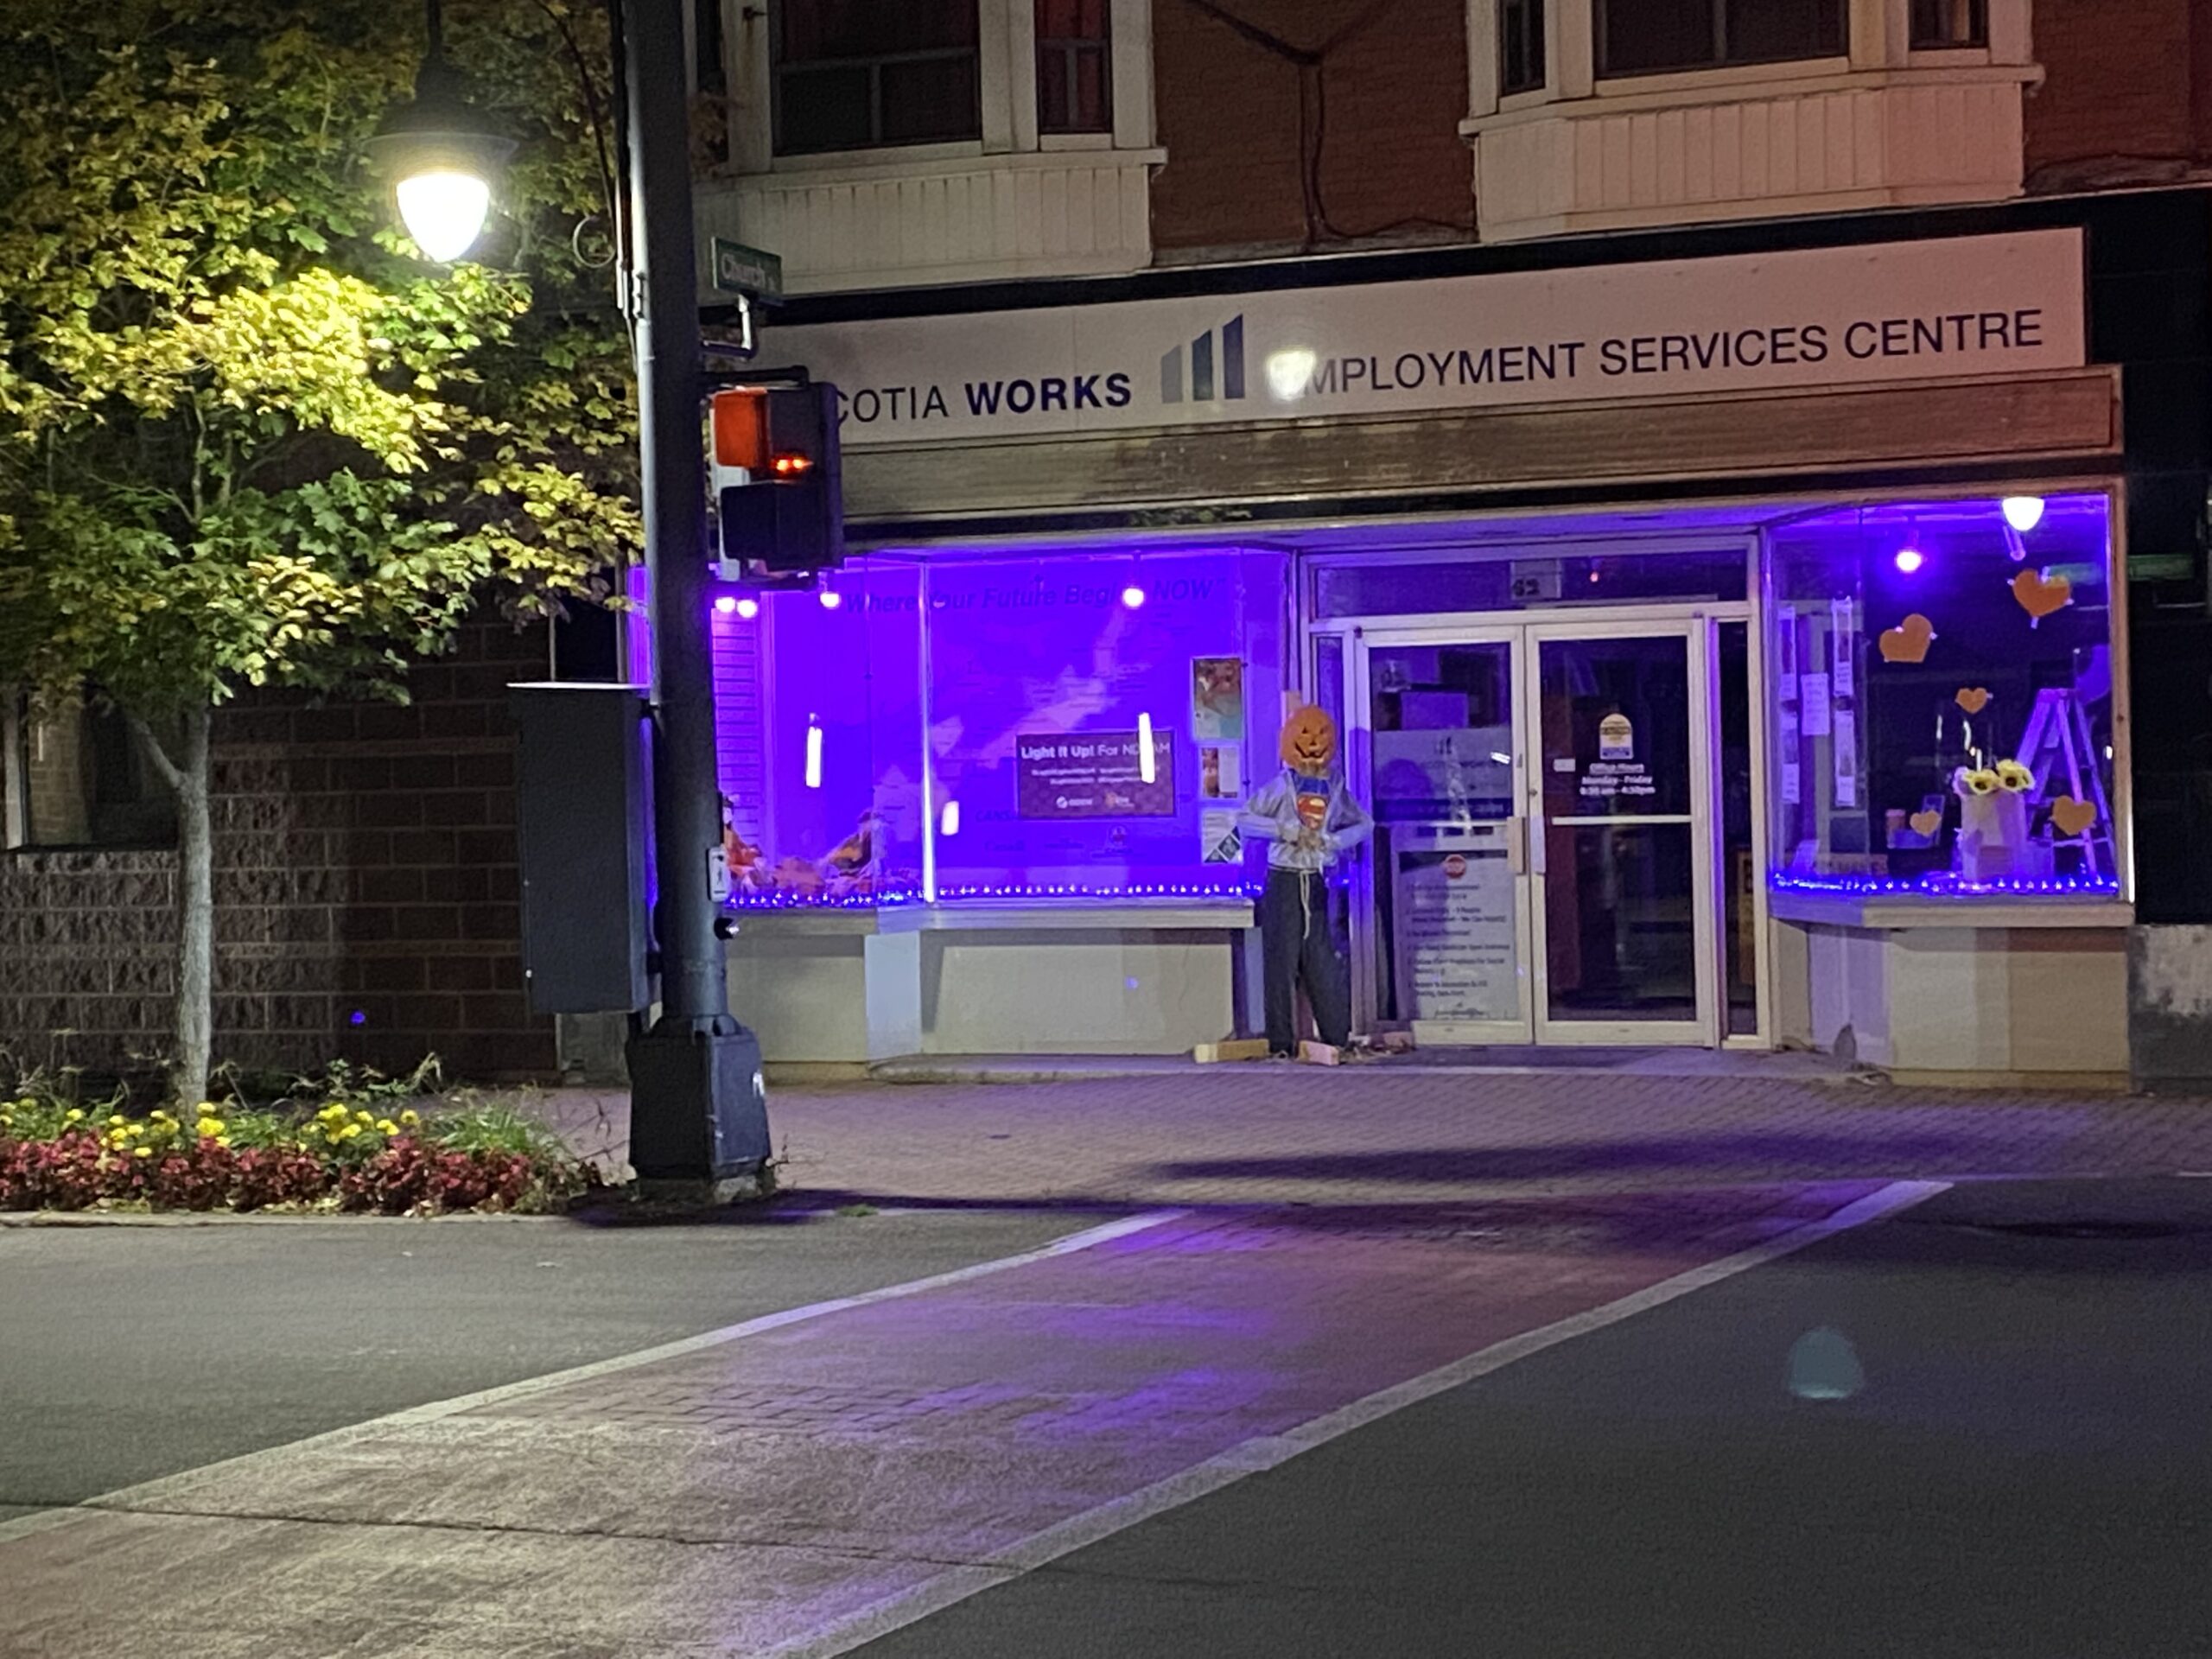 The interior window display areas of the Nova Scotia Works Employment Services Centre in Amherst, Nova Scotia, lit purple and blue.